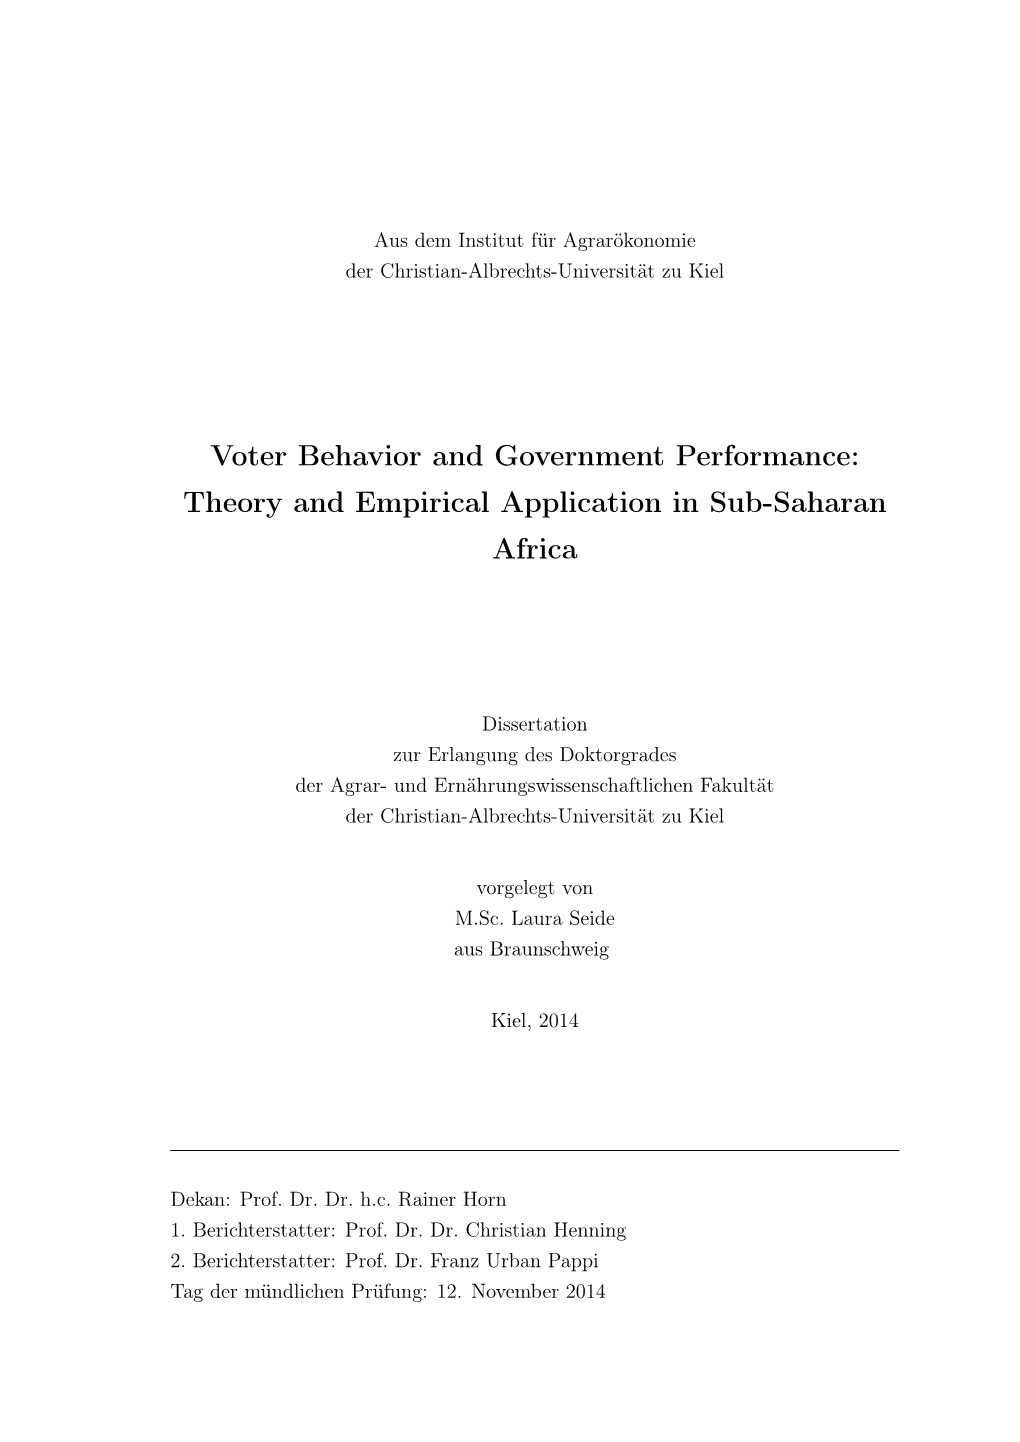 Voter Behavior and Government Performance: Theory and Empirical Application in Sub-Saharan Africa